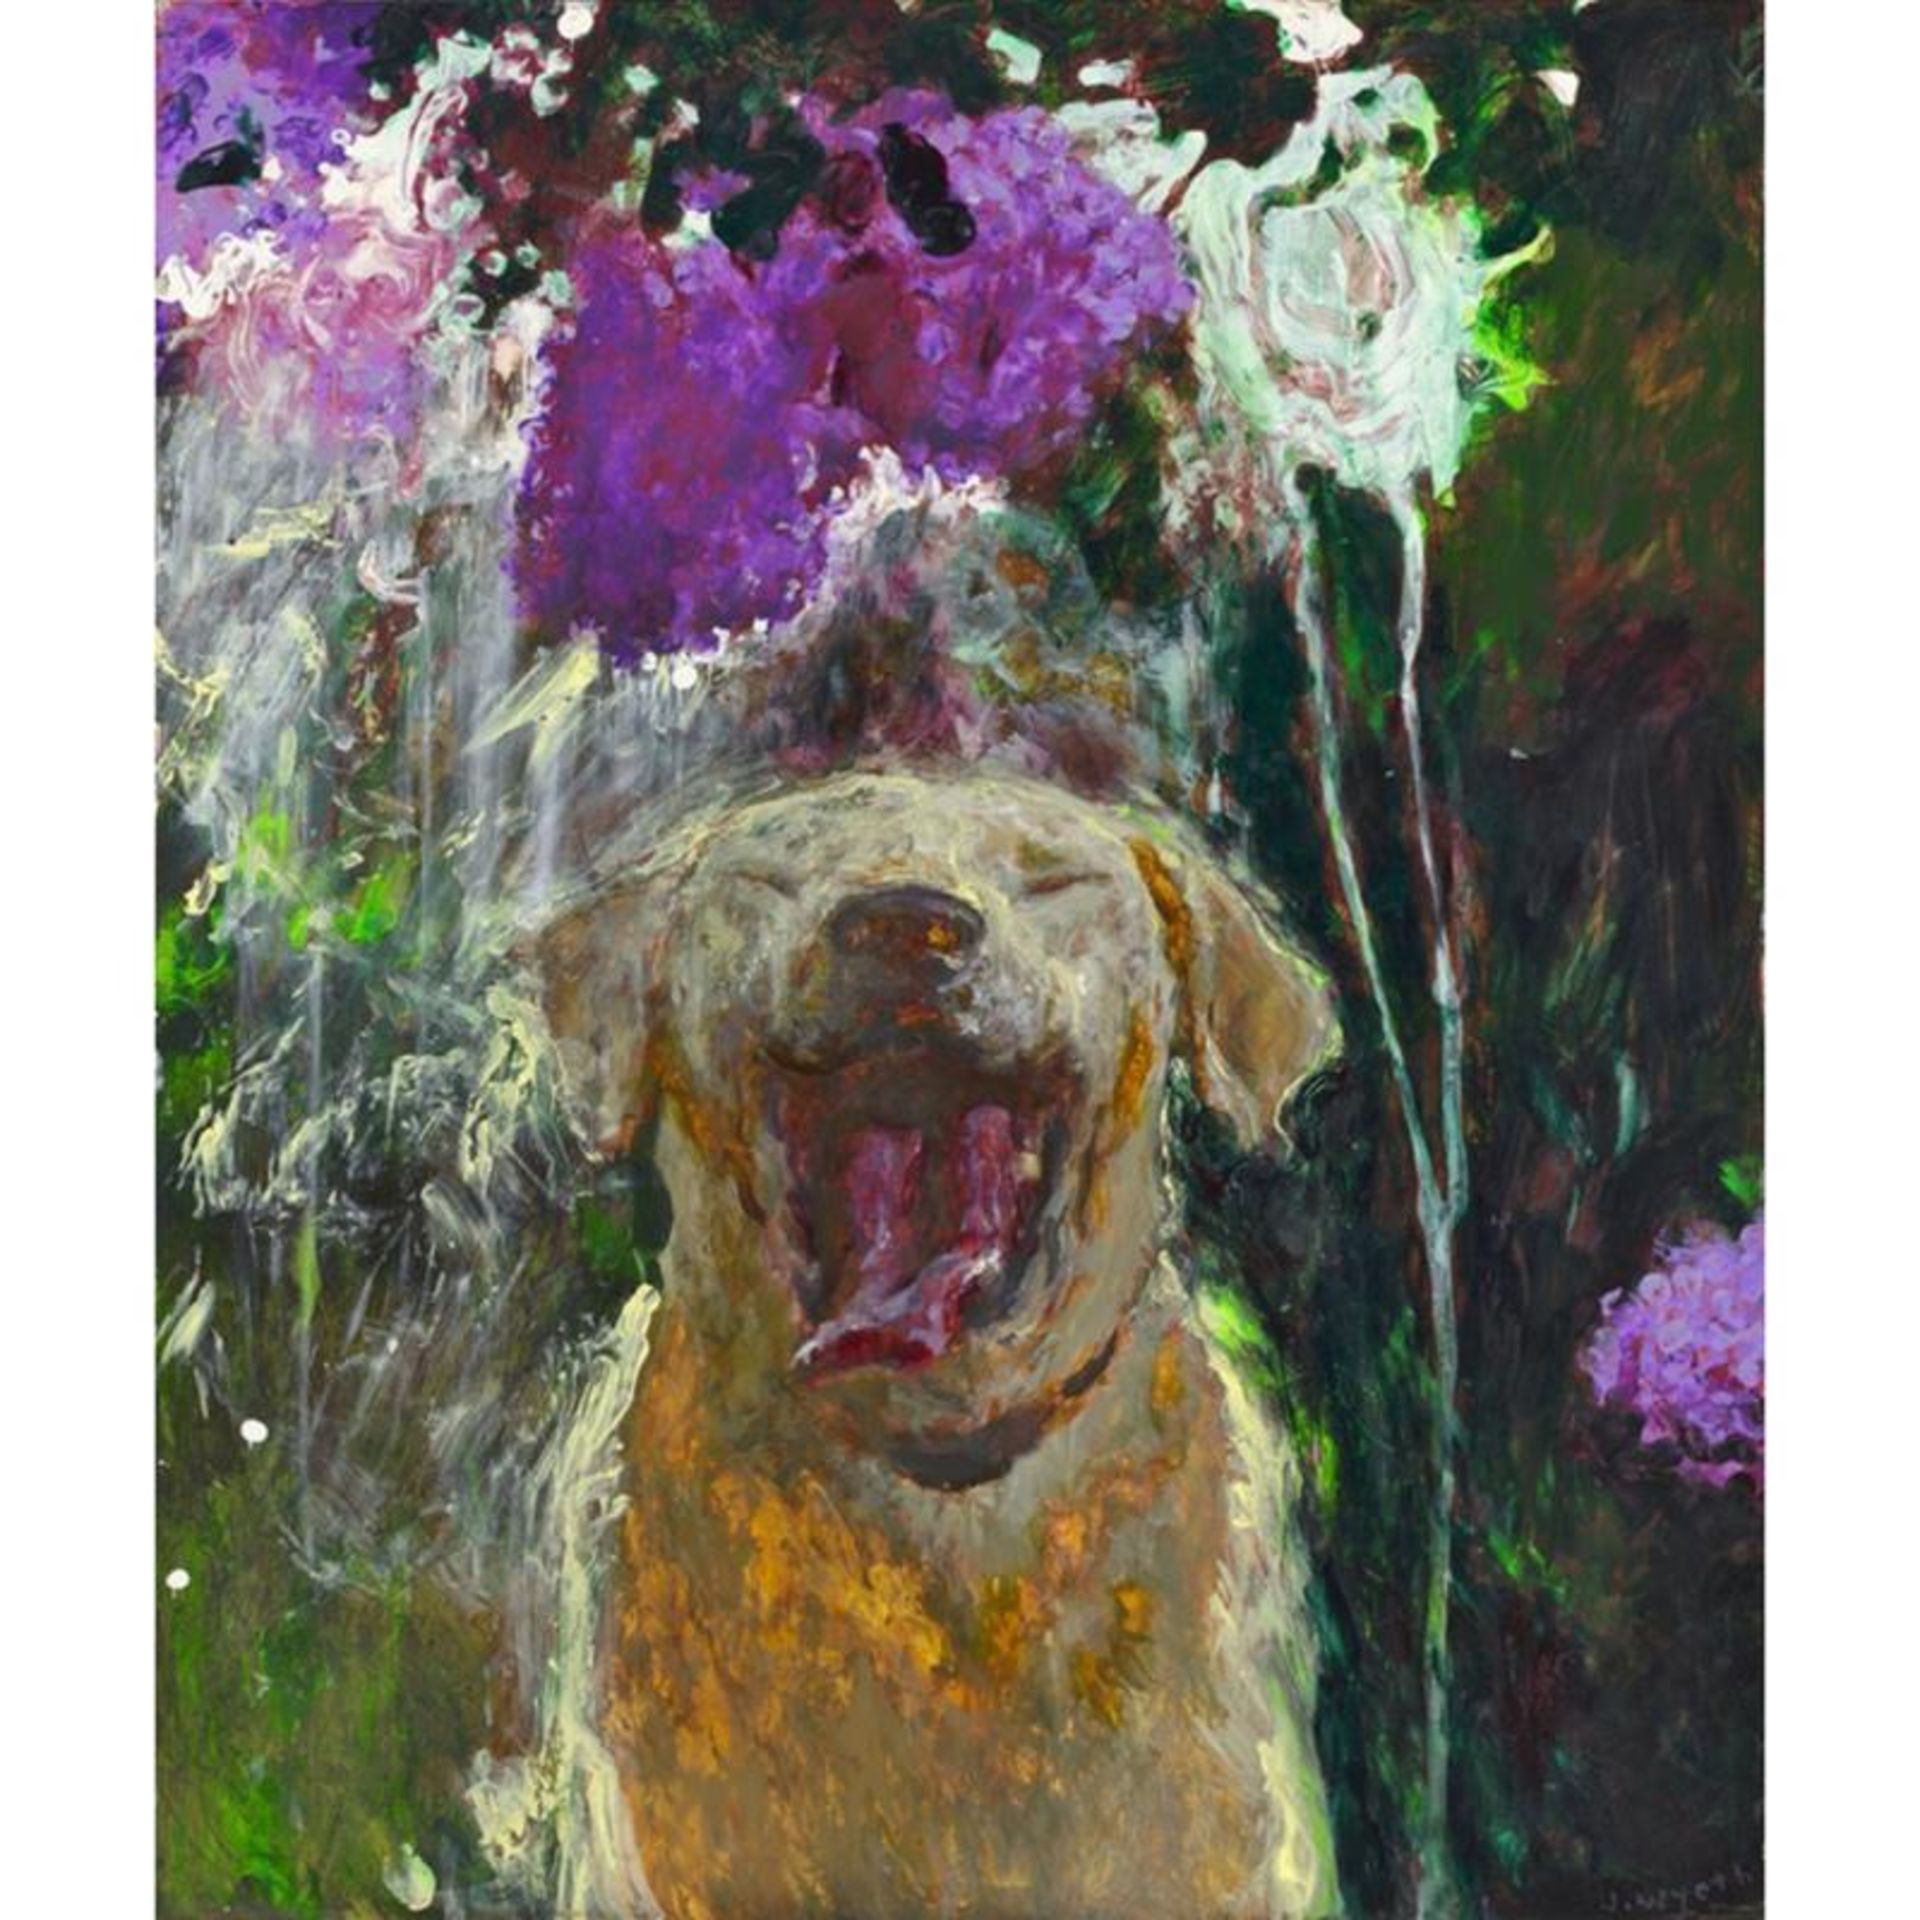 Jamie Wyeth "Dog Under Lilacs In a Downpour, 2018" Offset Lithograph